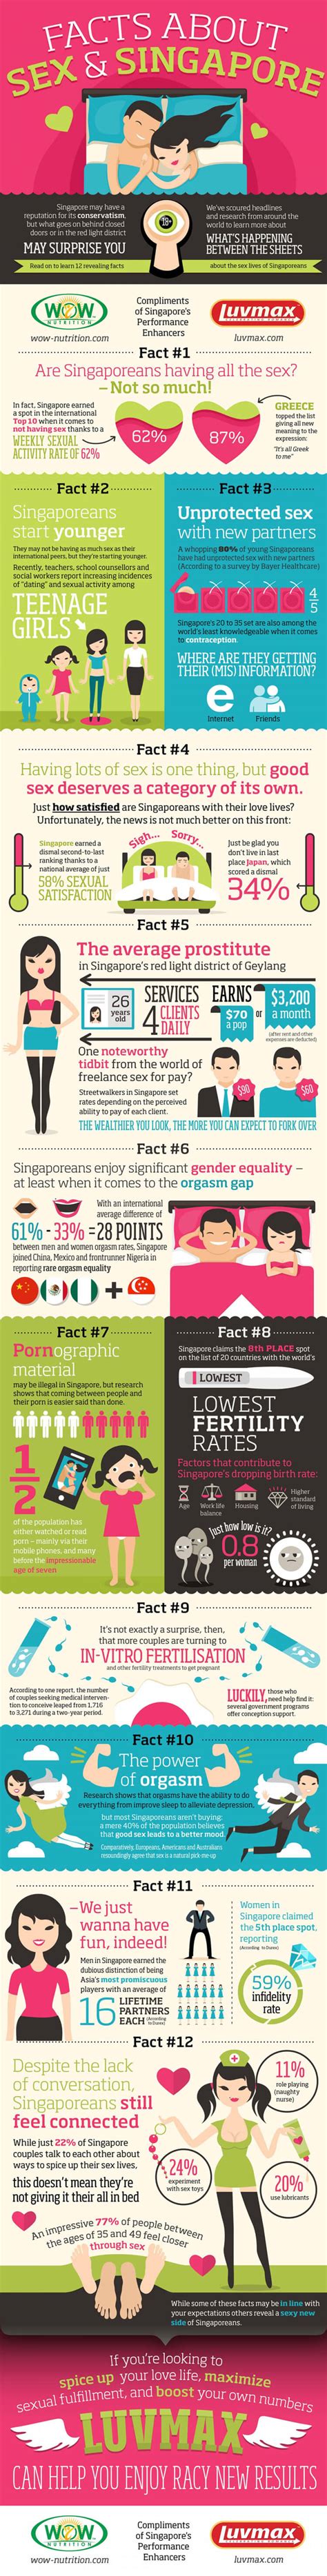 Facts About Sex And Singapore Infographic Infographic Plaza